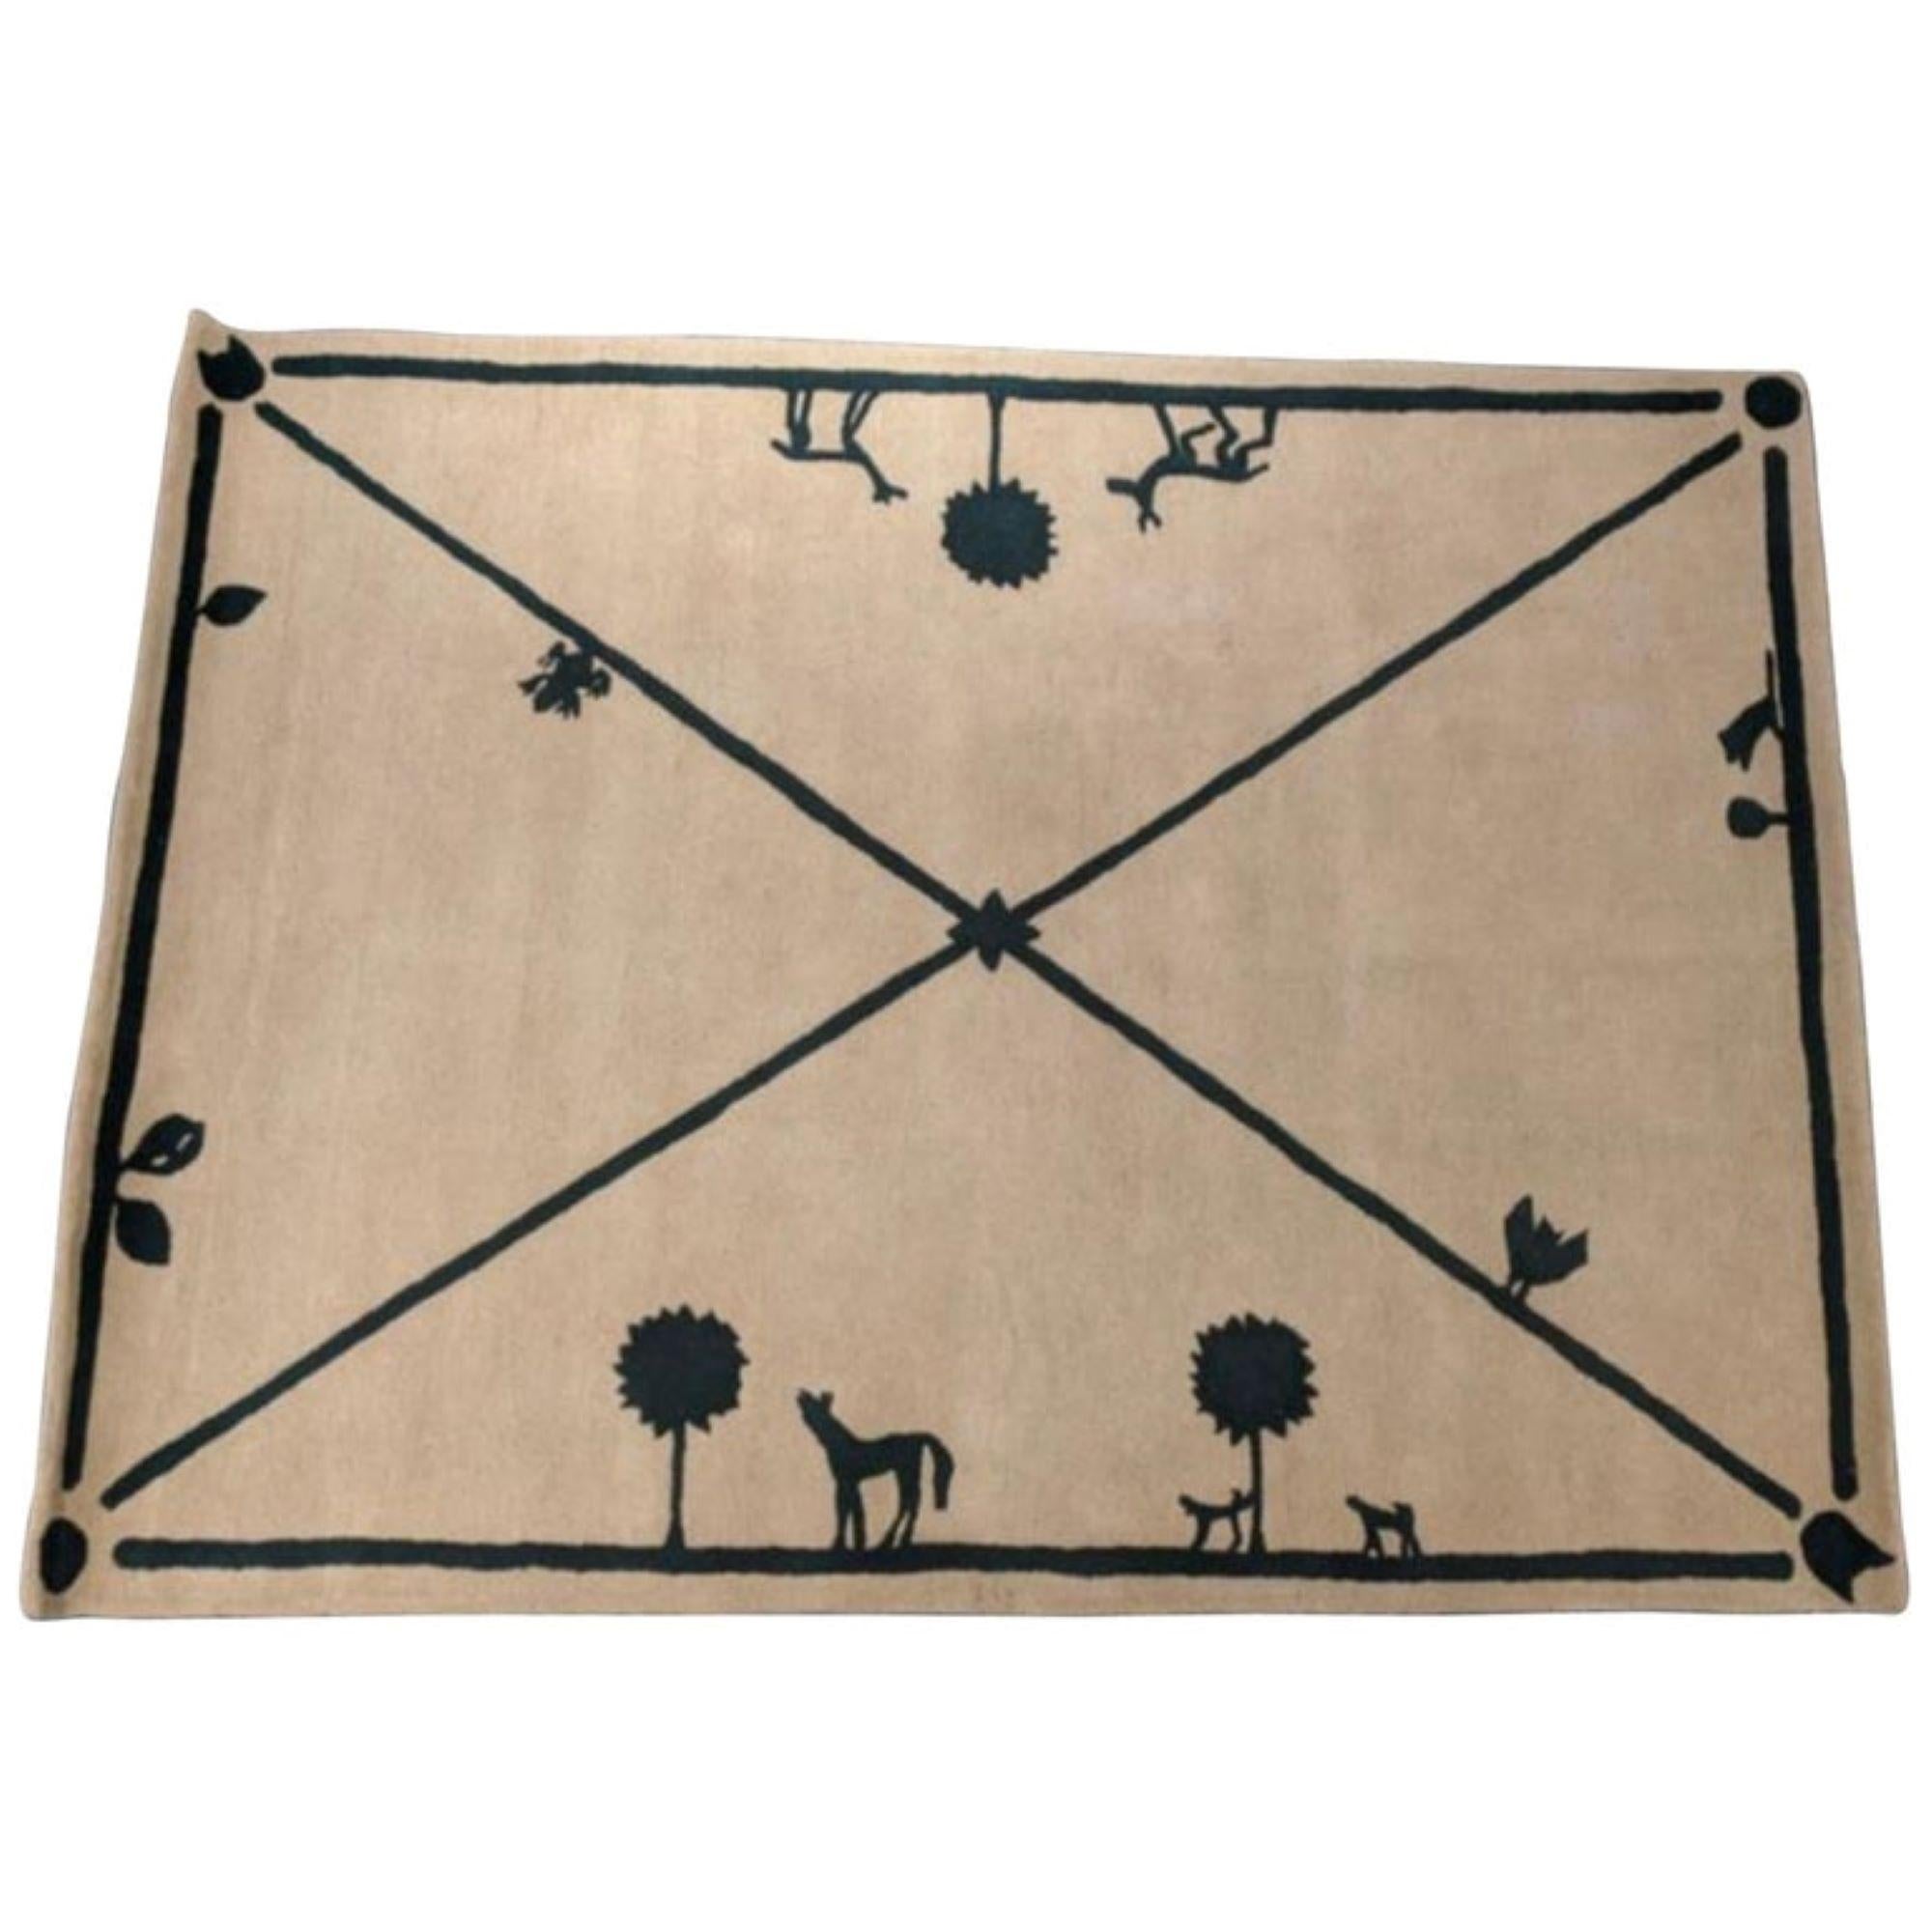 Modern Artistic Rug After Promenade Des Amis, by Diego Giacometti